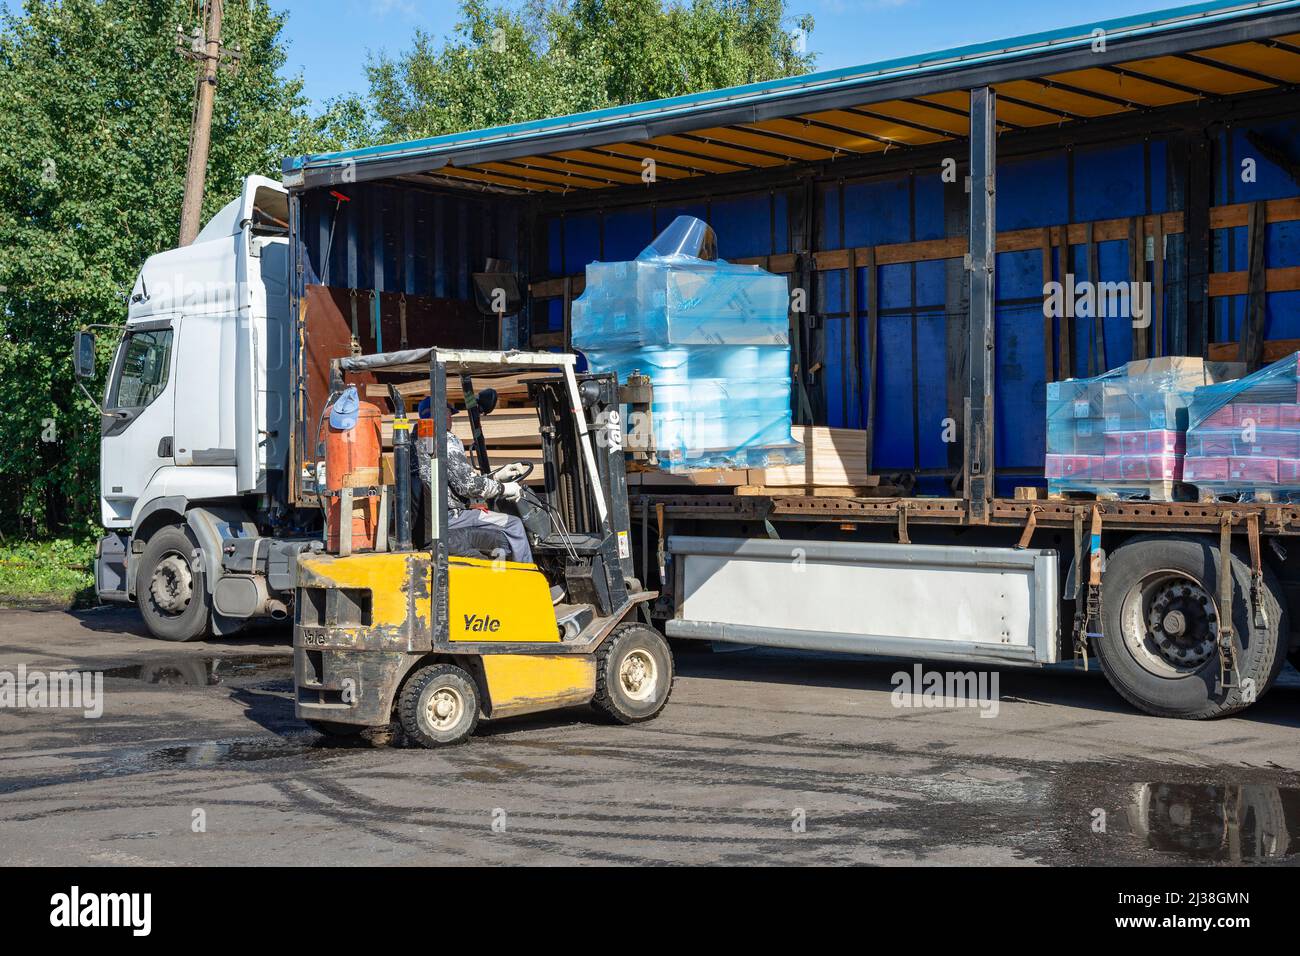 SAINT PETERSBURG, RUSSIA - SEPTEMBER 10, 2021: Loading of a truck with a semi-trailer construction goods Stock Photo